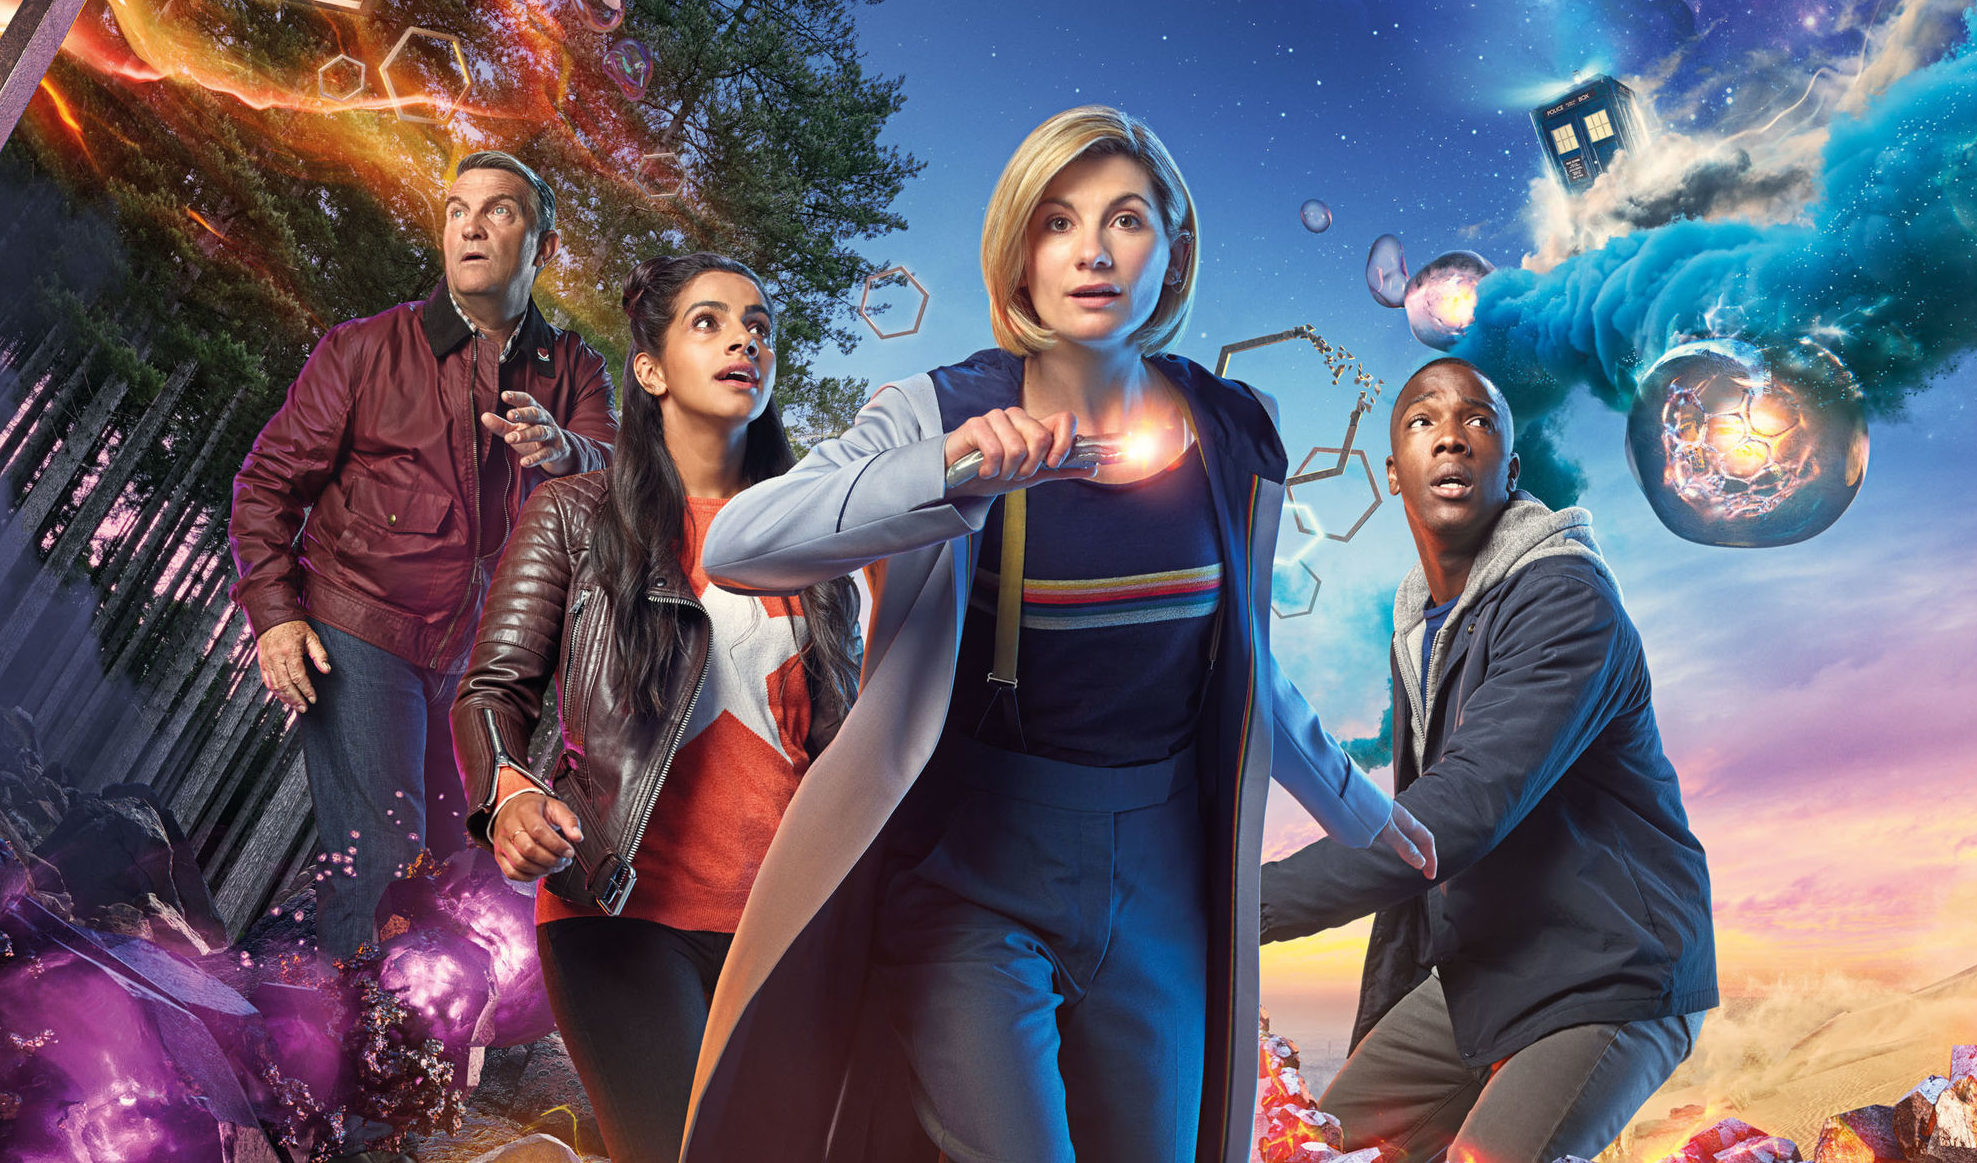 Jodie Whittaker as The Doctor with (left to right) Bradley Walsh as Graham, Mandip Gill as Yaz and Tosin Cole as Ryan (Henrik Knudsen/BBC/PA Wire)